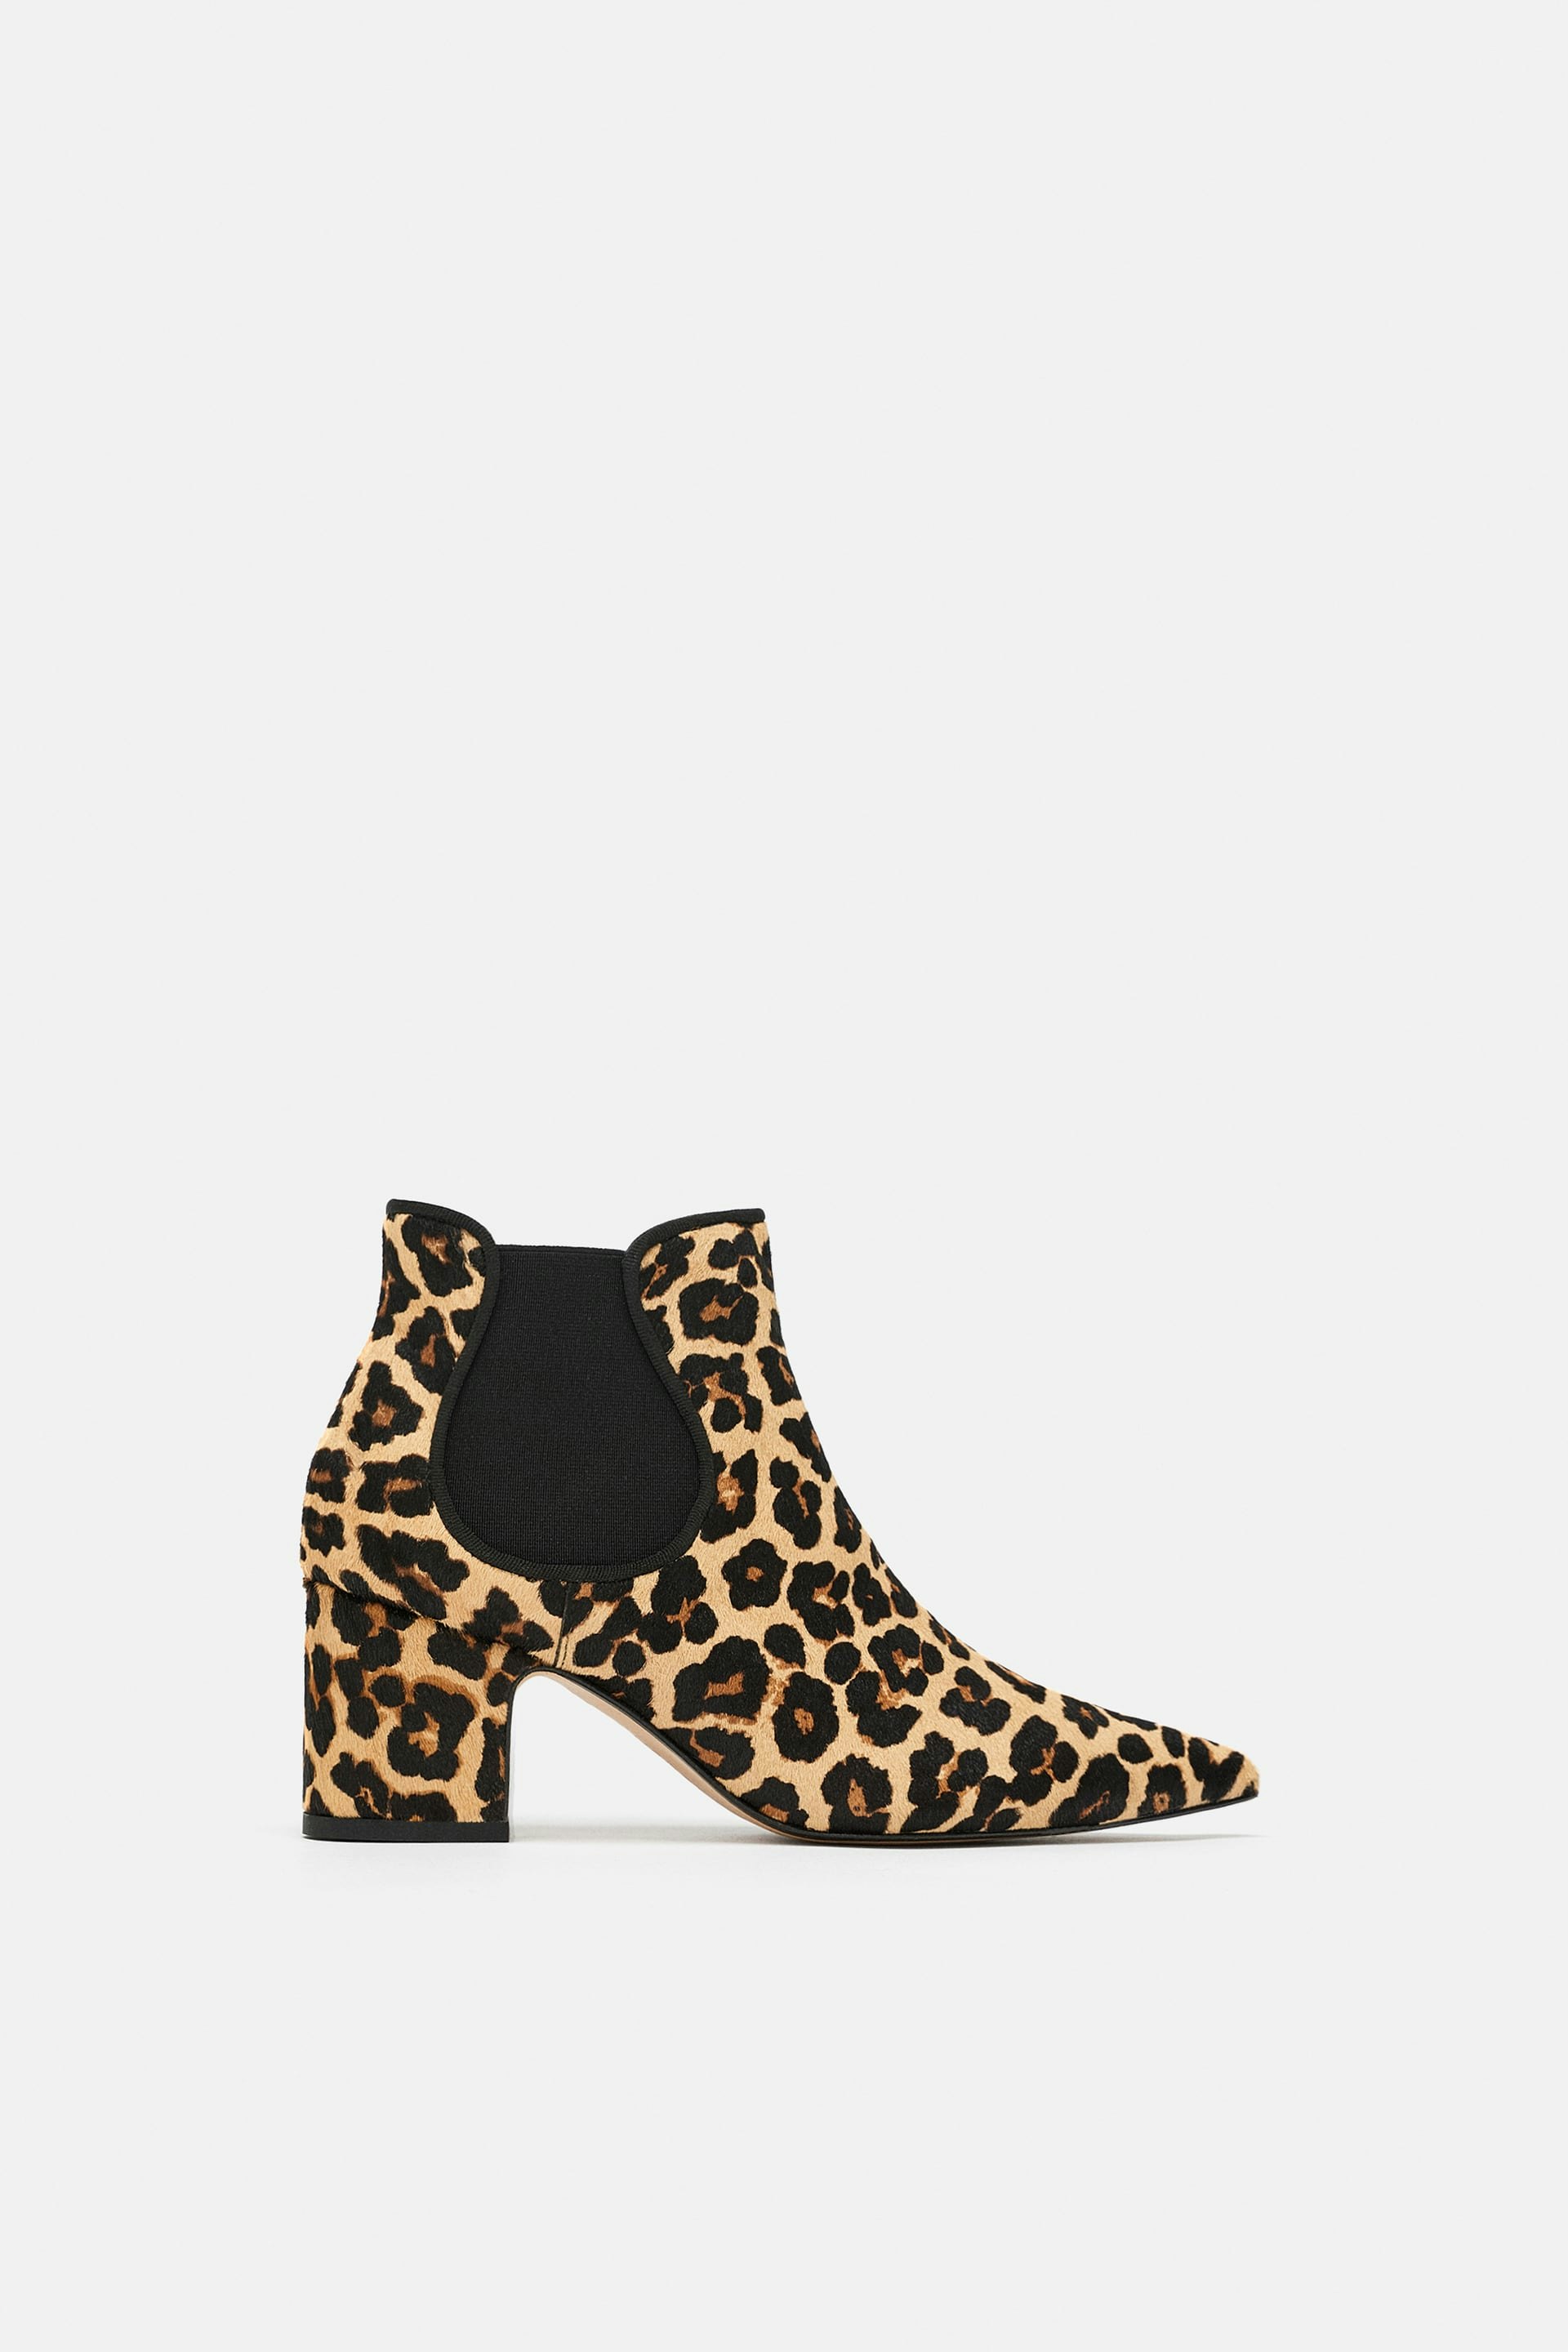 leather animal print ankle boots zara